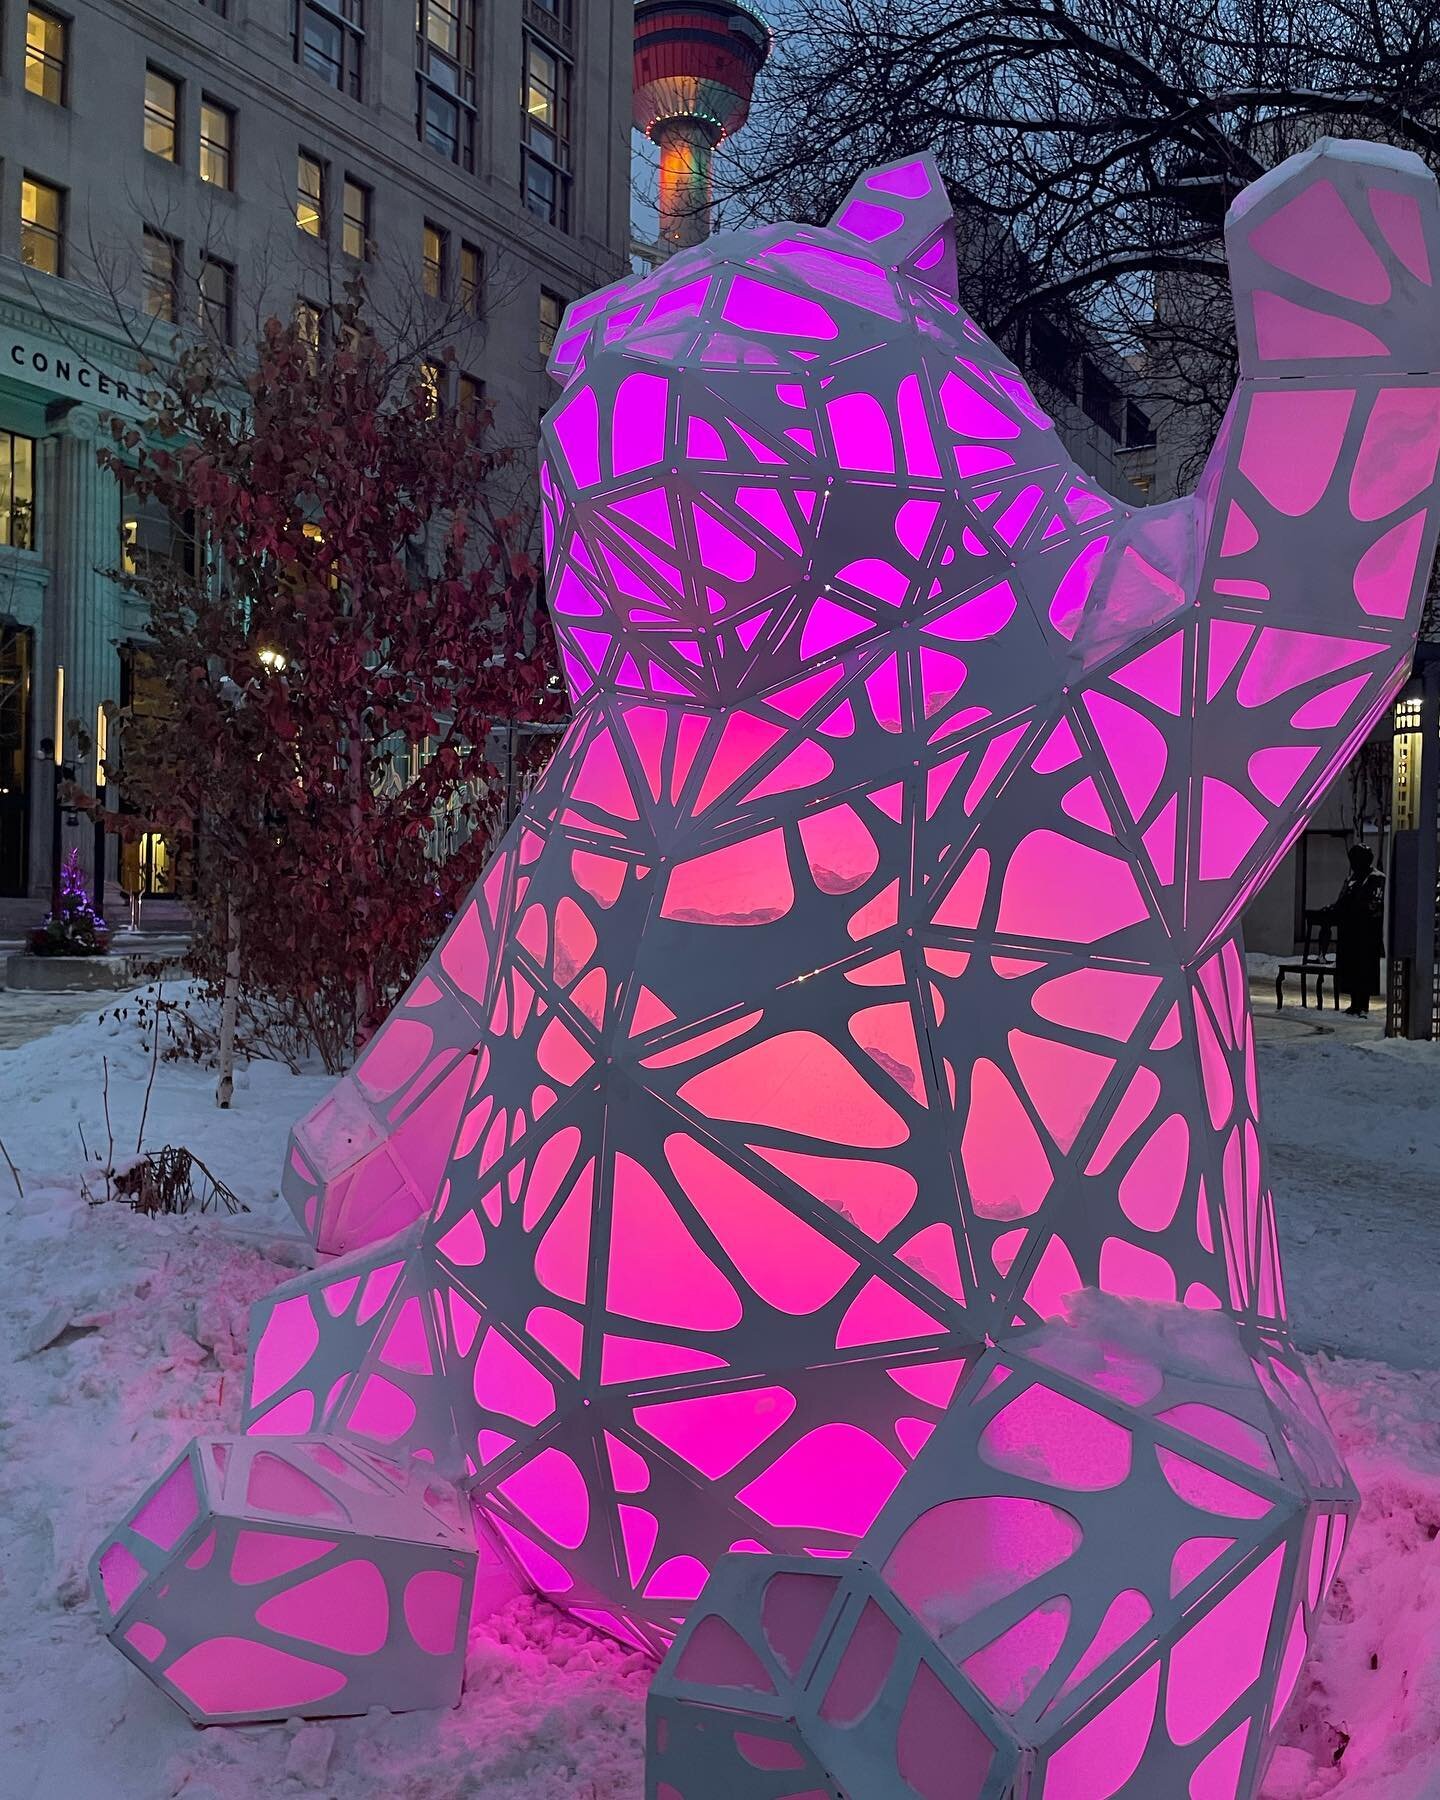 The 9ft Bear is at Olympic plaza for Chinook Blast. So many great installations to check out!